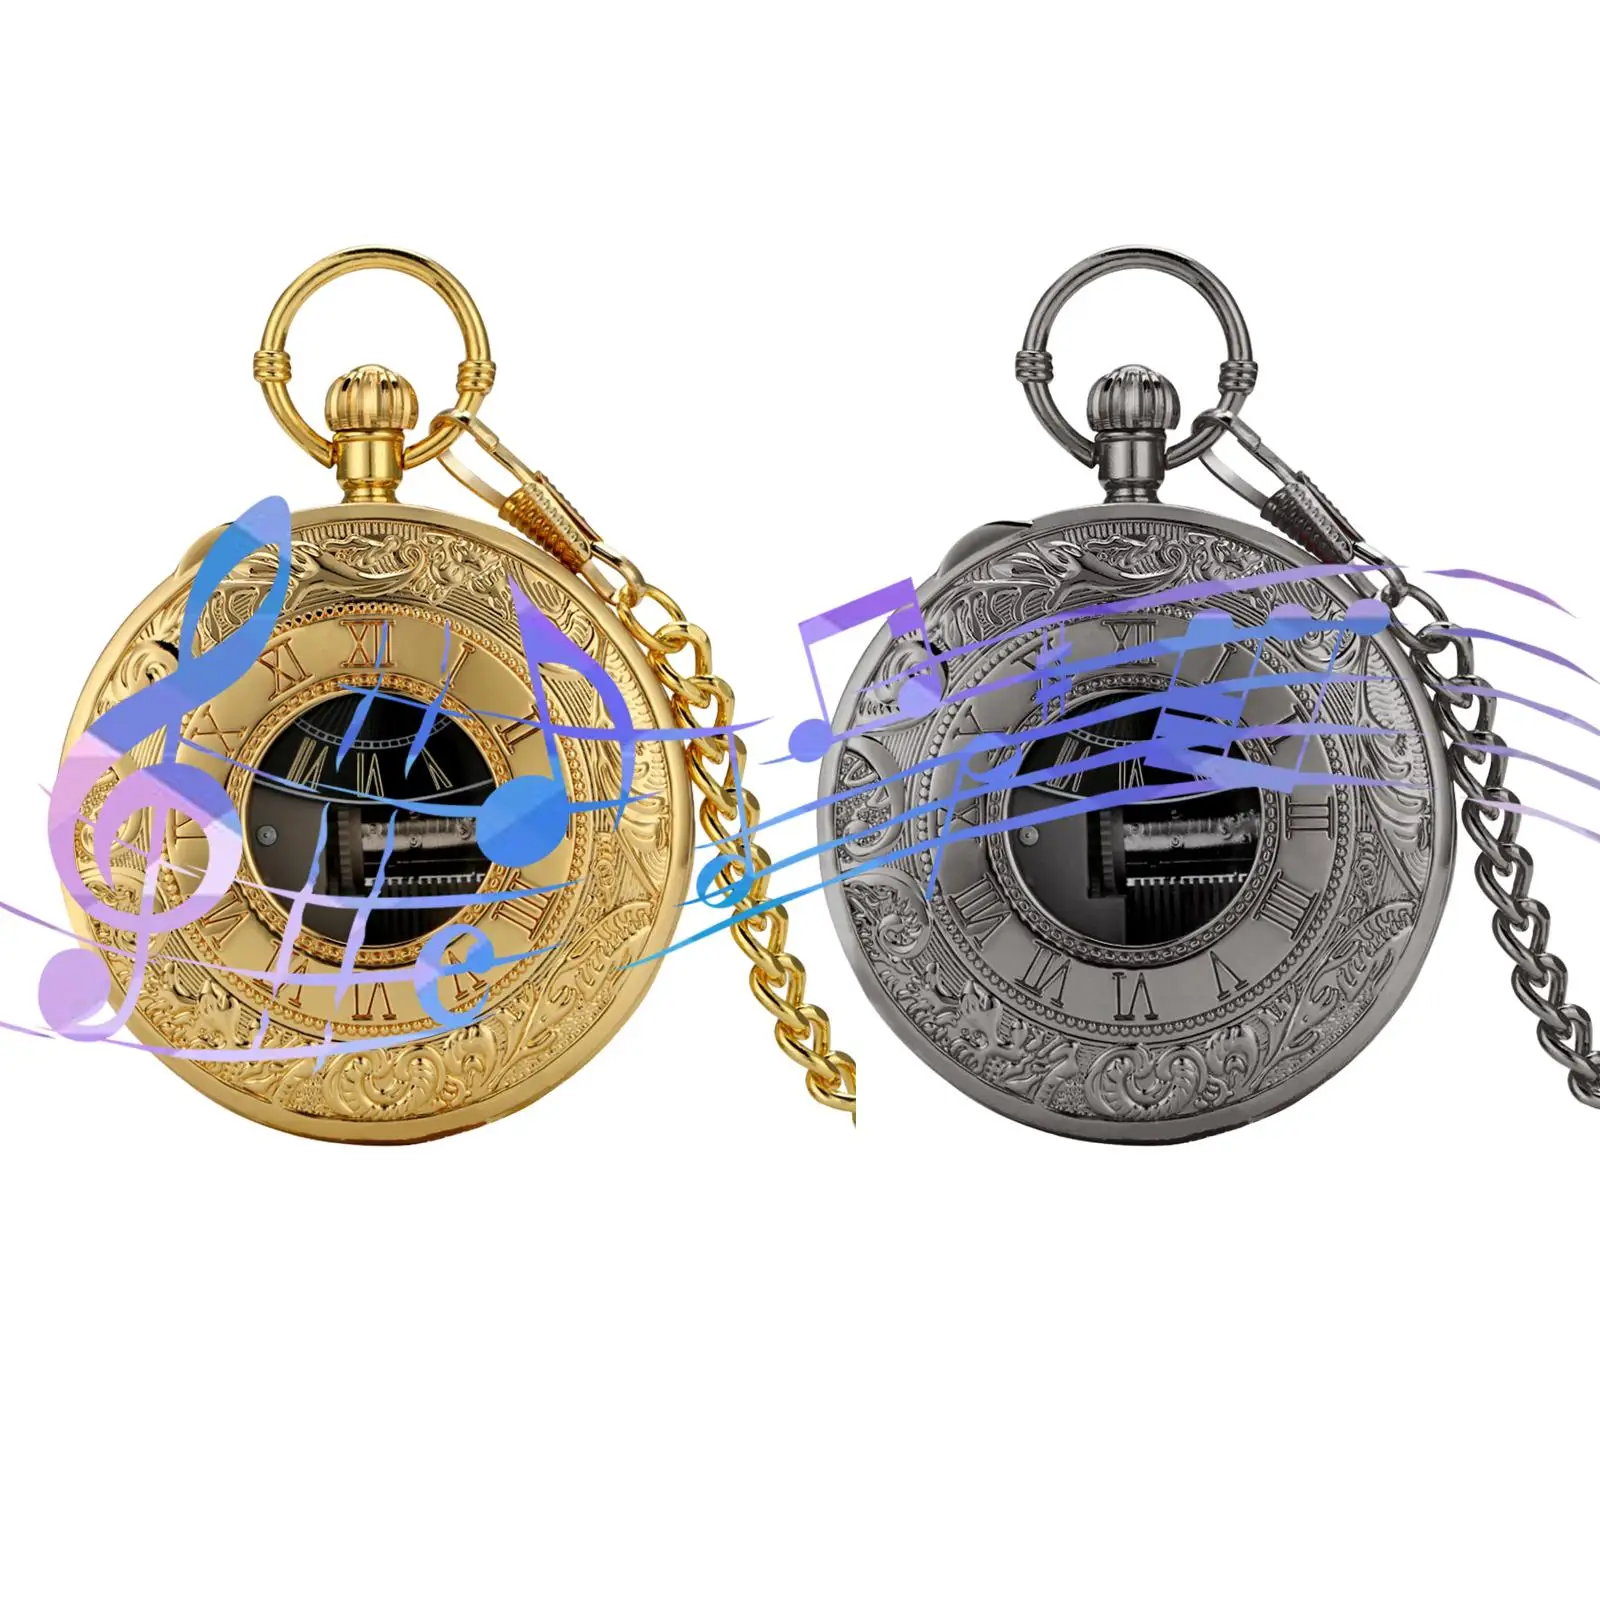 Antique Quartz Pocket Watch Chain Clock Musical Movement Fashion , The Removable Chain IS Easy to Assemble and Disassemble Round